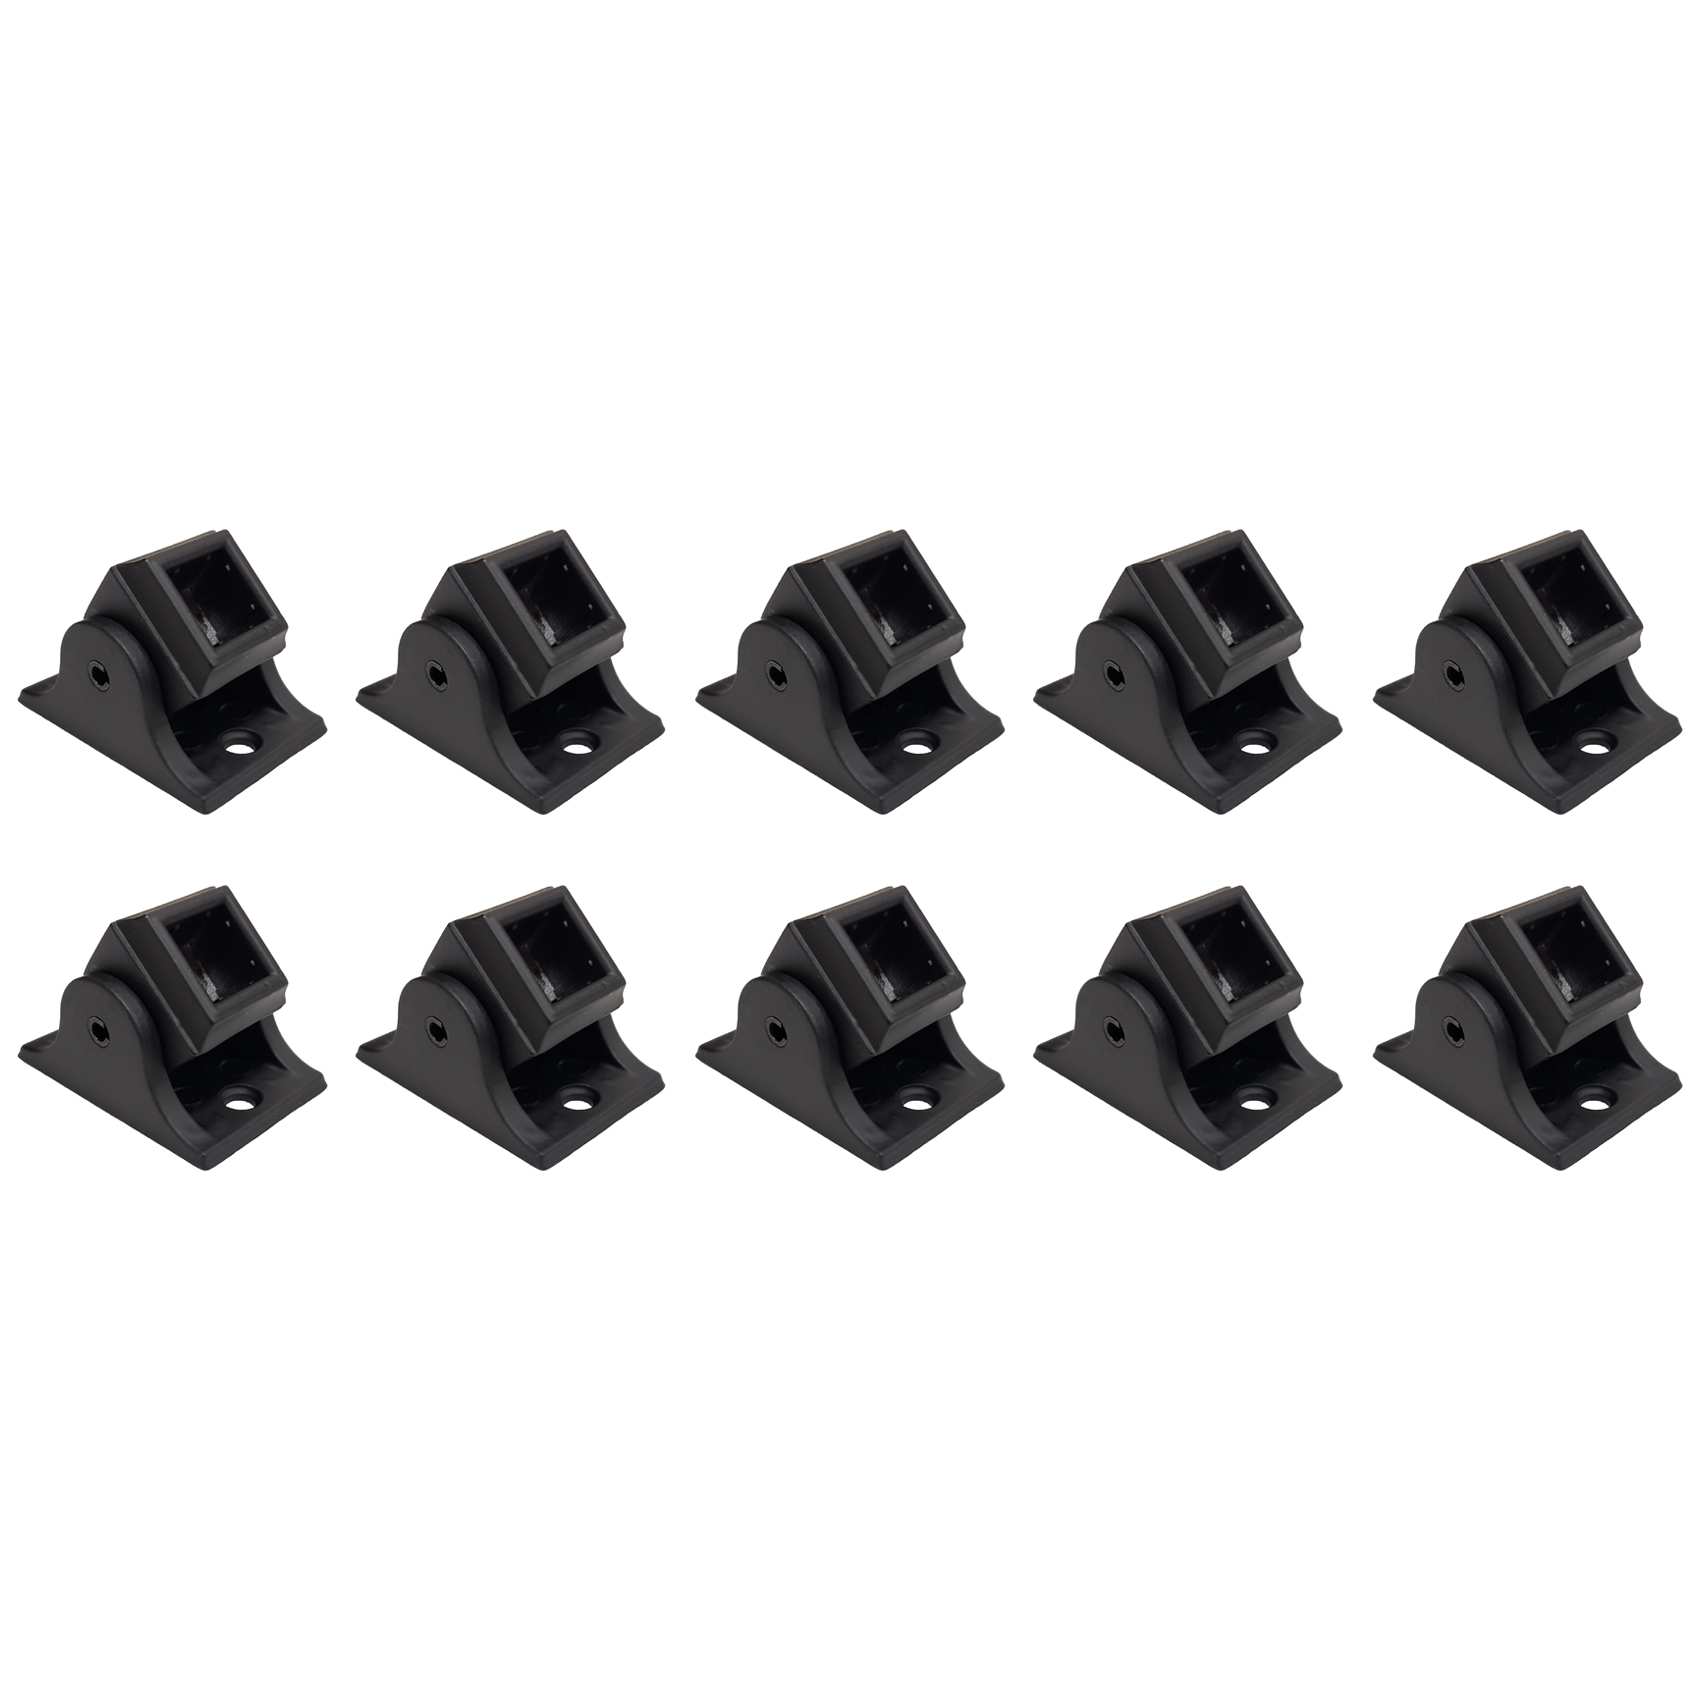 44 Satin Black Myard Pitch Angled Slant Shoes with Screw for 1/2 Square Iron Stair Balusters 10-Pack